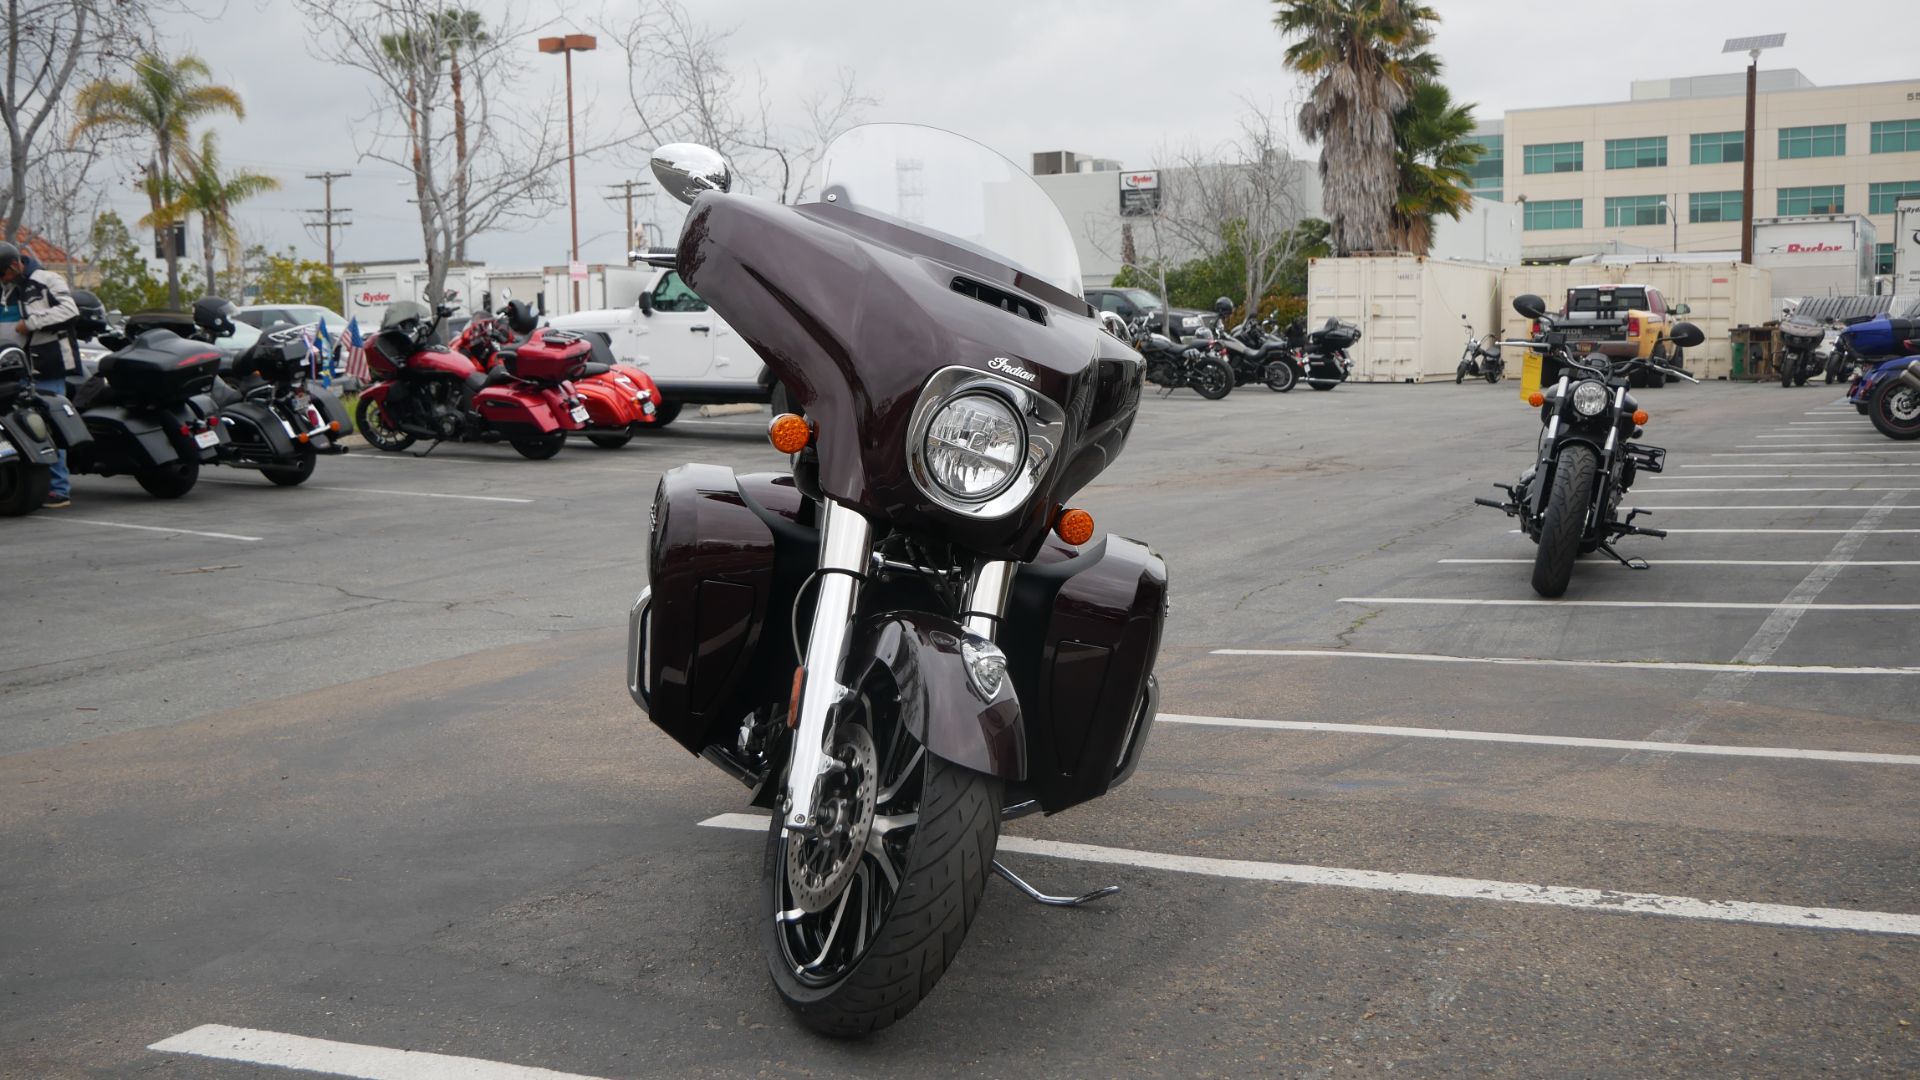 2022 Indian Motorcycle Roadmaster® Limited in San Diego, California - Photo 3